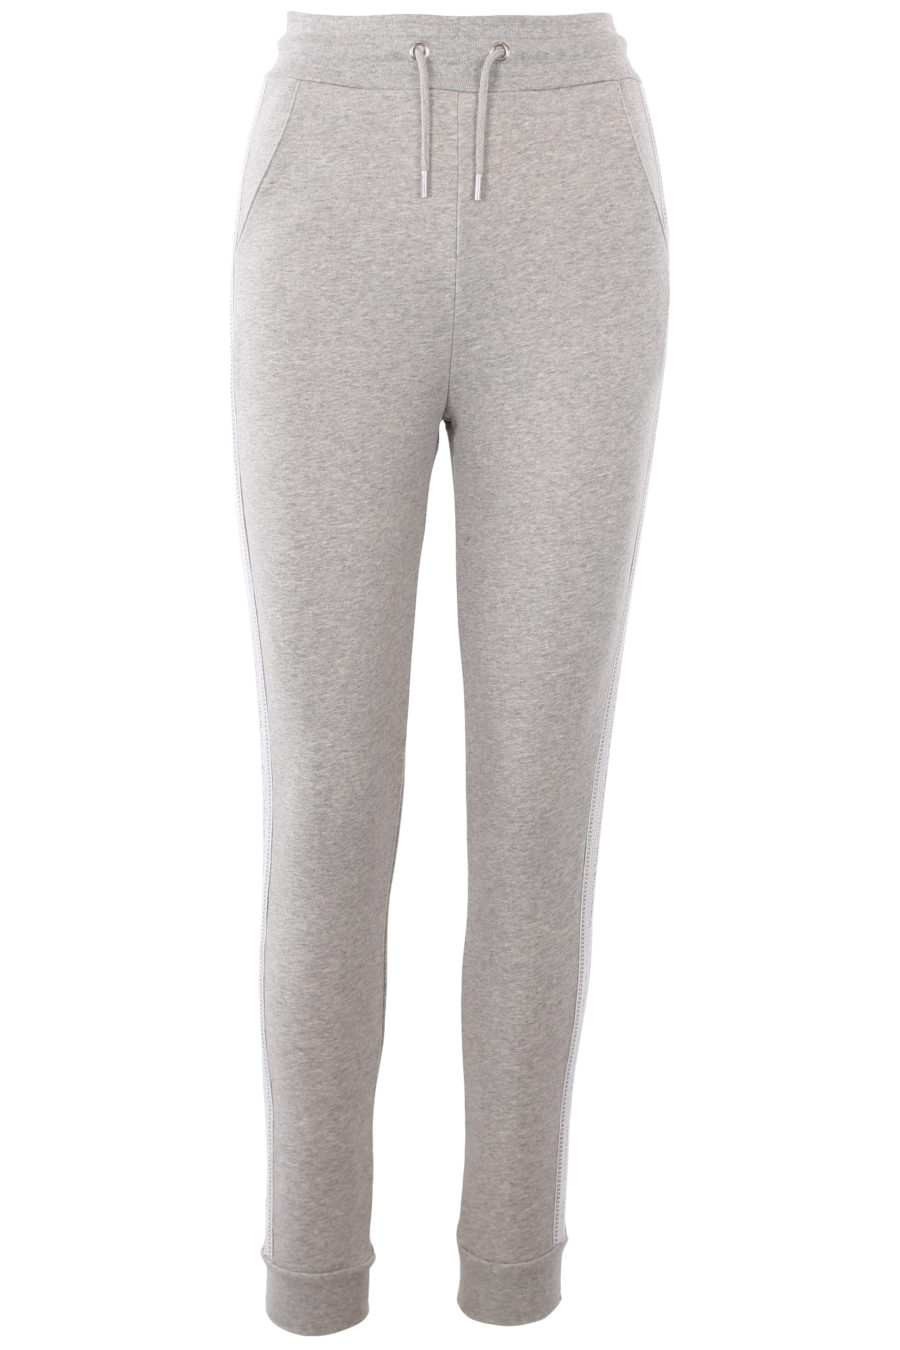 Tracksuit bottoms grey with lace effect logo - IMG 1350